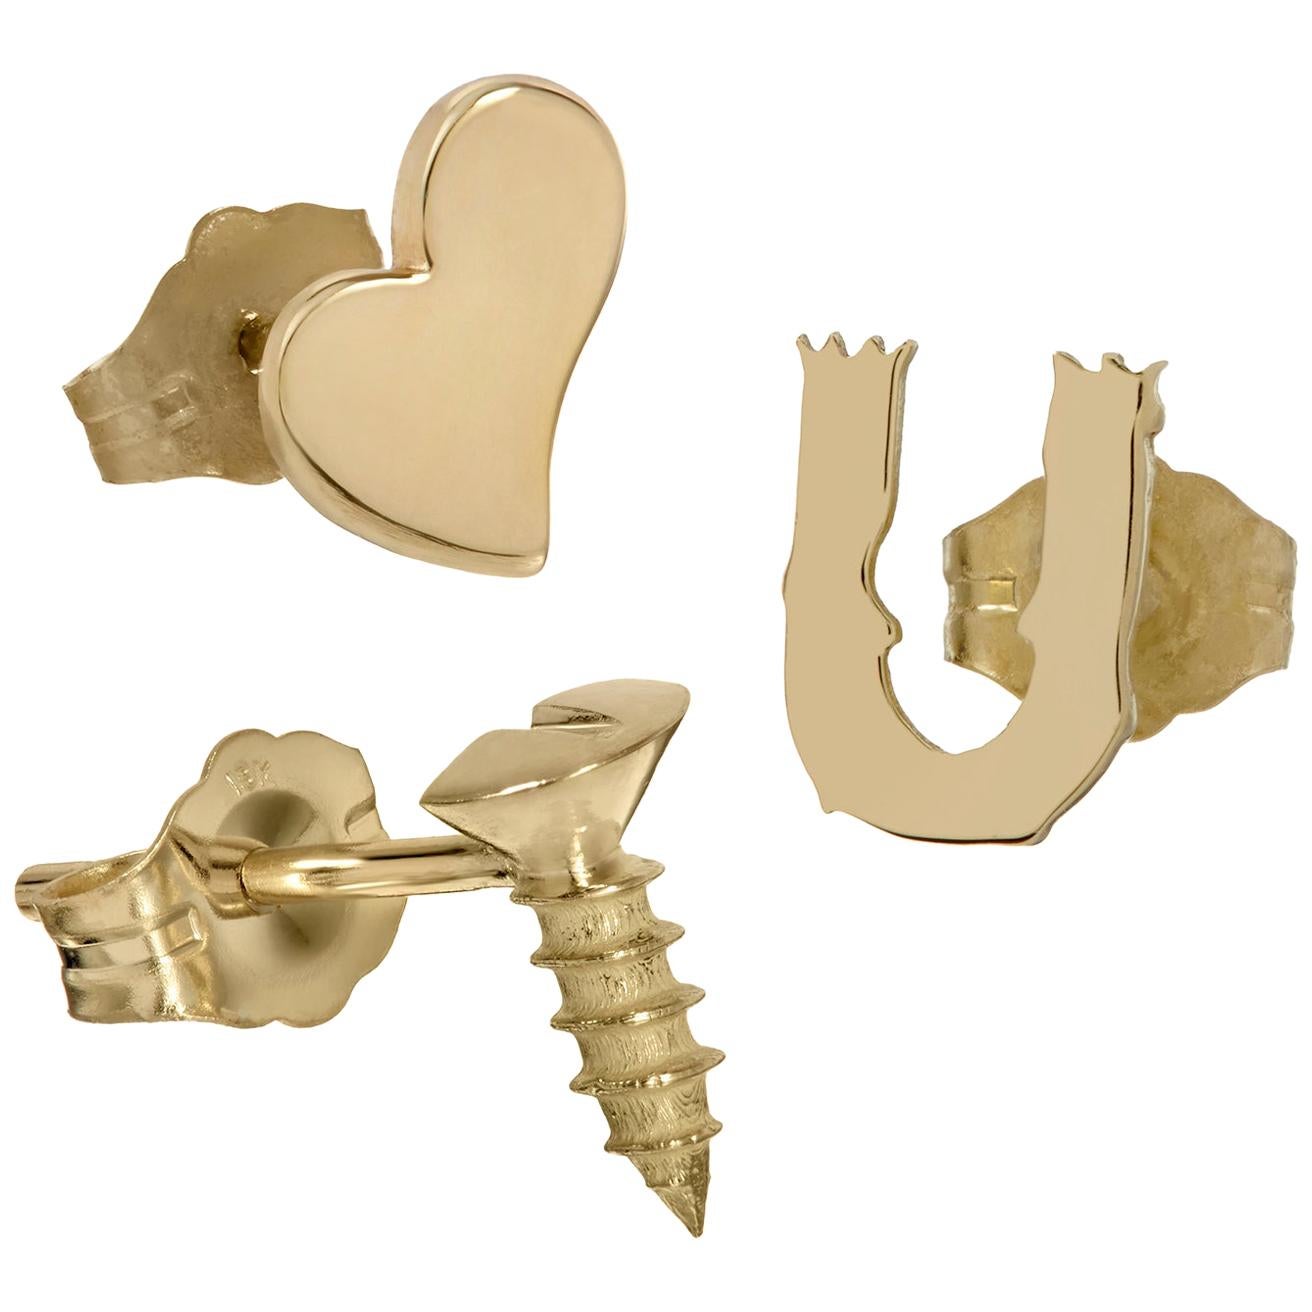 Wendy Brandes "Bad Romance" 18K Gold Heart and Screw Stud Earring Trio